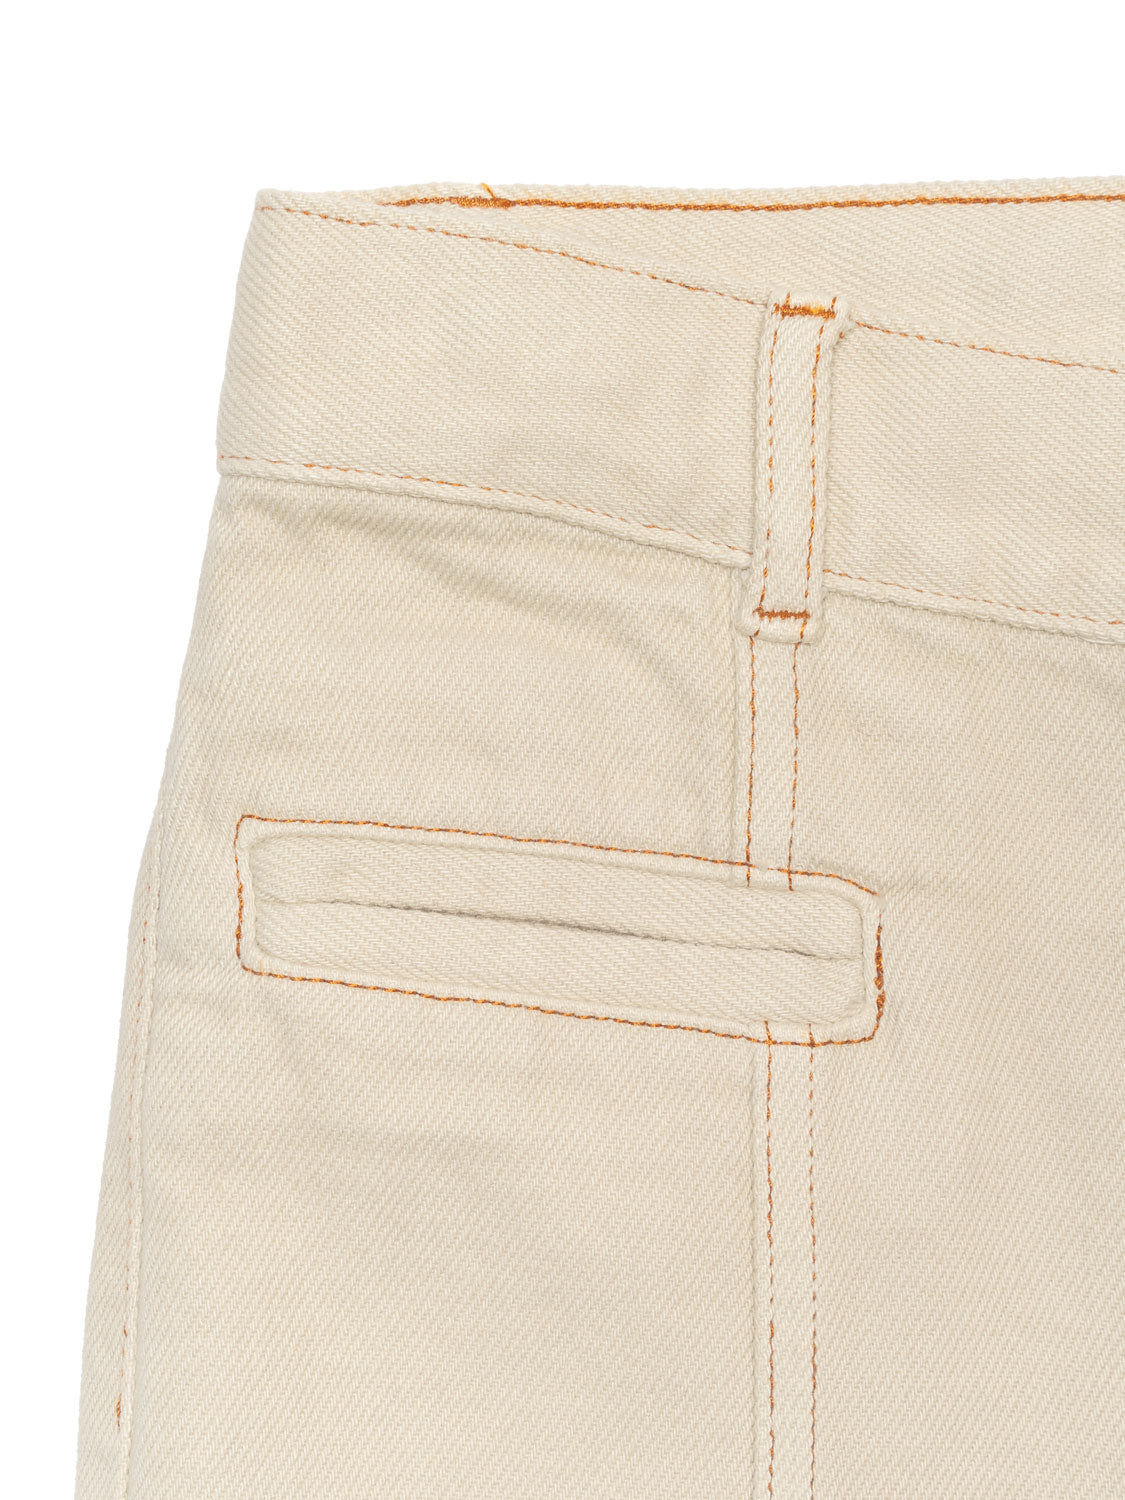 High Wasted Wide Led Jeans Oriane - Beige